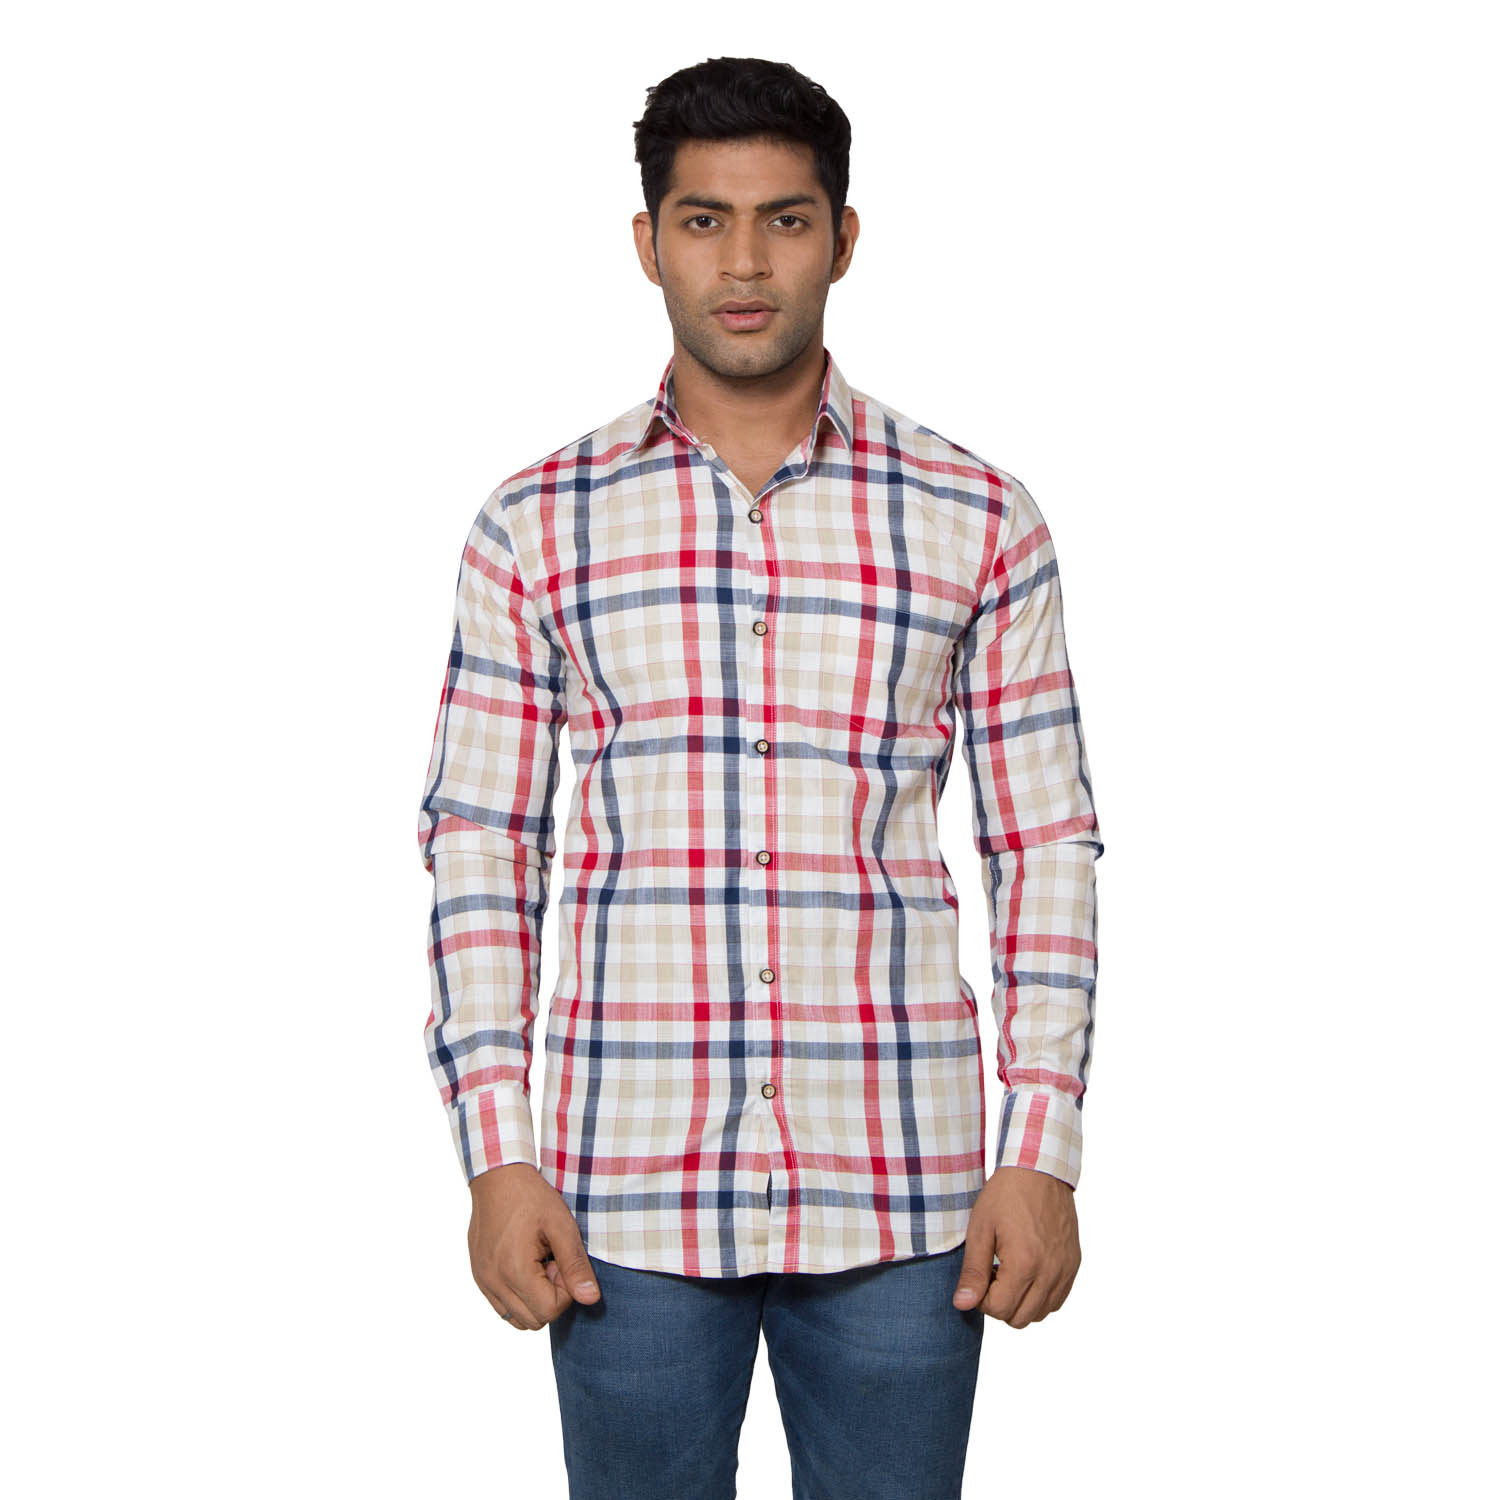 Buy tabser shirt Online @ ₹399 from ShopClues